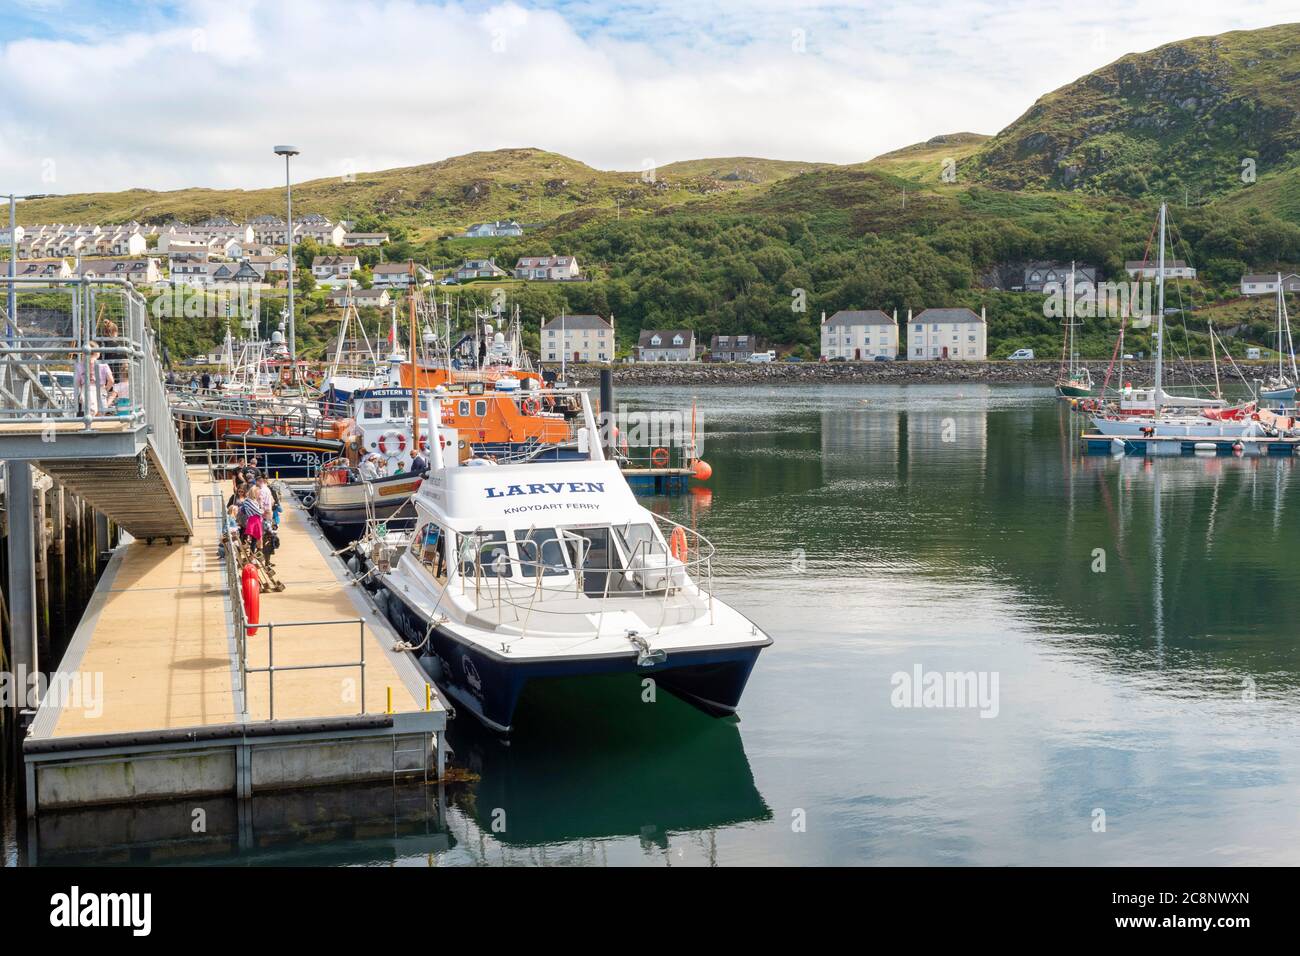 MALLAIG HARBOUR LOCHABER WEST COAST SCOTLAND WITH BOATS INCLUDING A LIFEBOAT AND PASSENGERS FOR THE LARVEN KNOYDART FERRY AND WESTERN ISLES Stock Photo